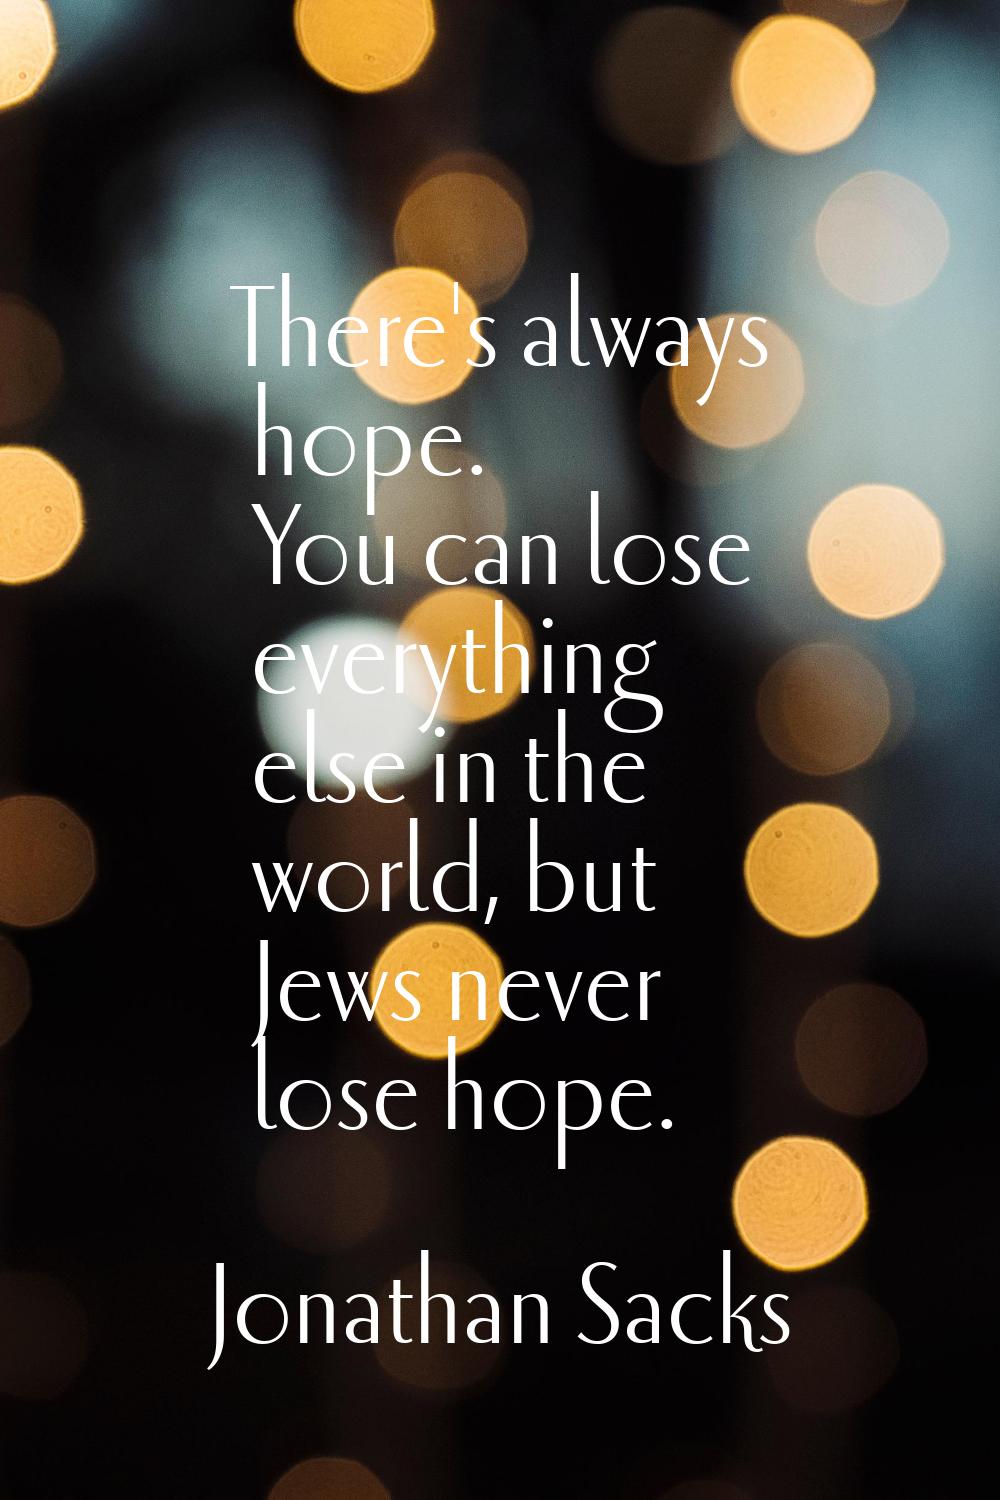 There's always hope. You can lose everything else in the world, but Jews never lose hope.